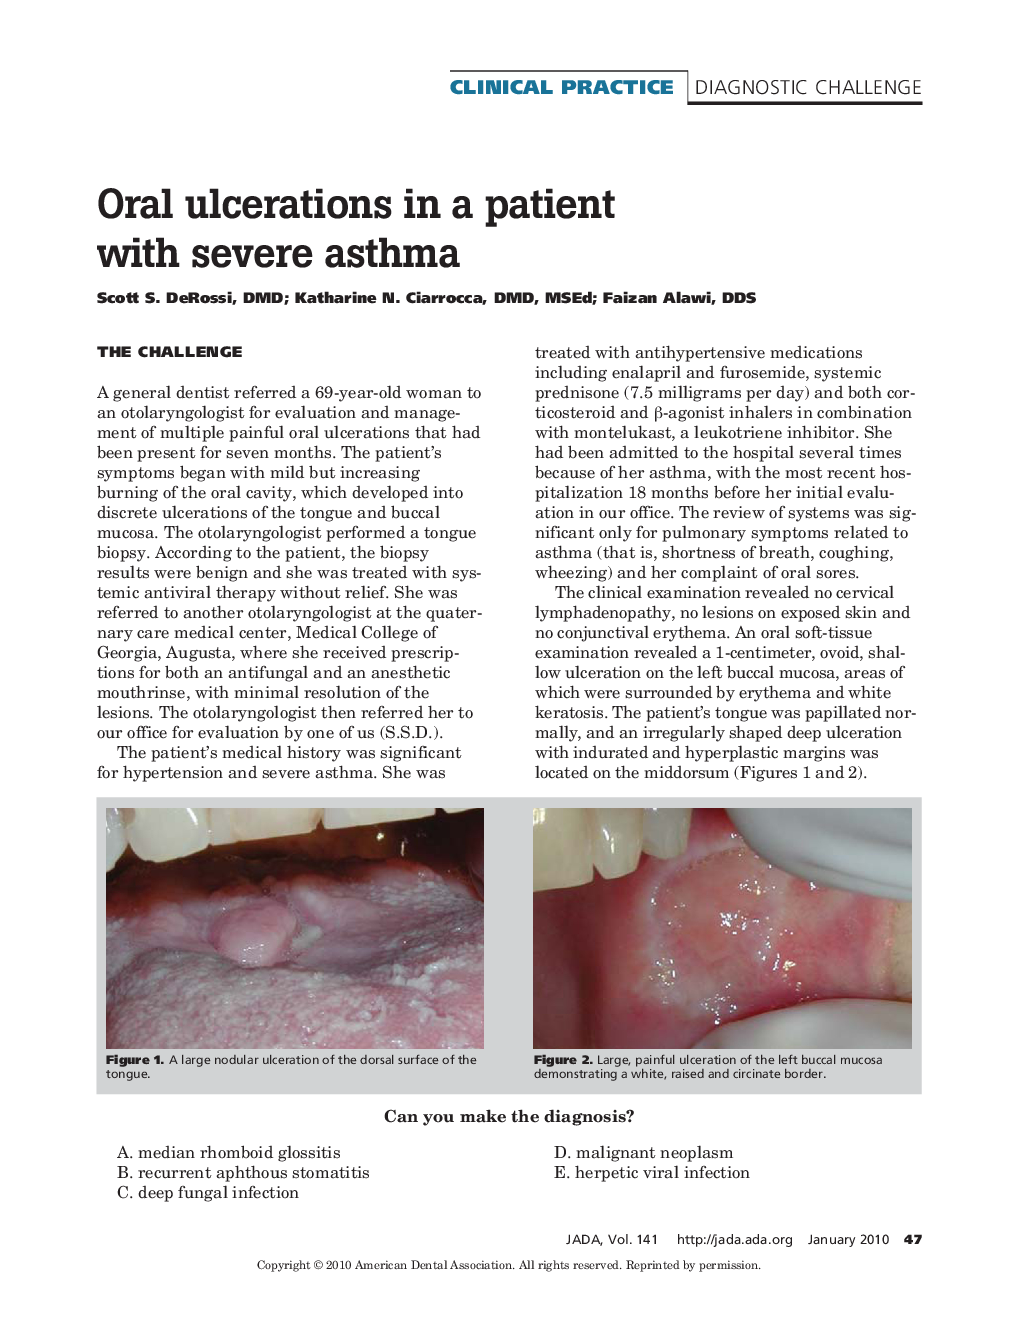 Oral ulcerations in a patient with severe asthma